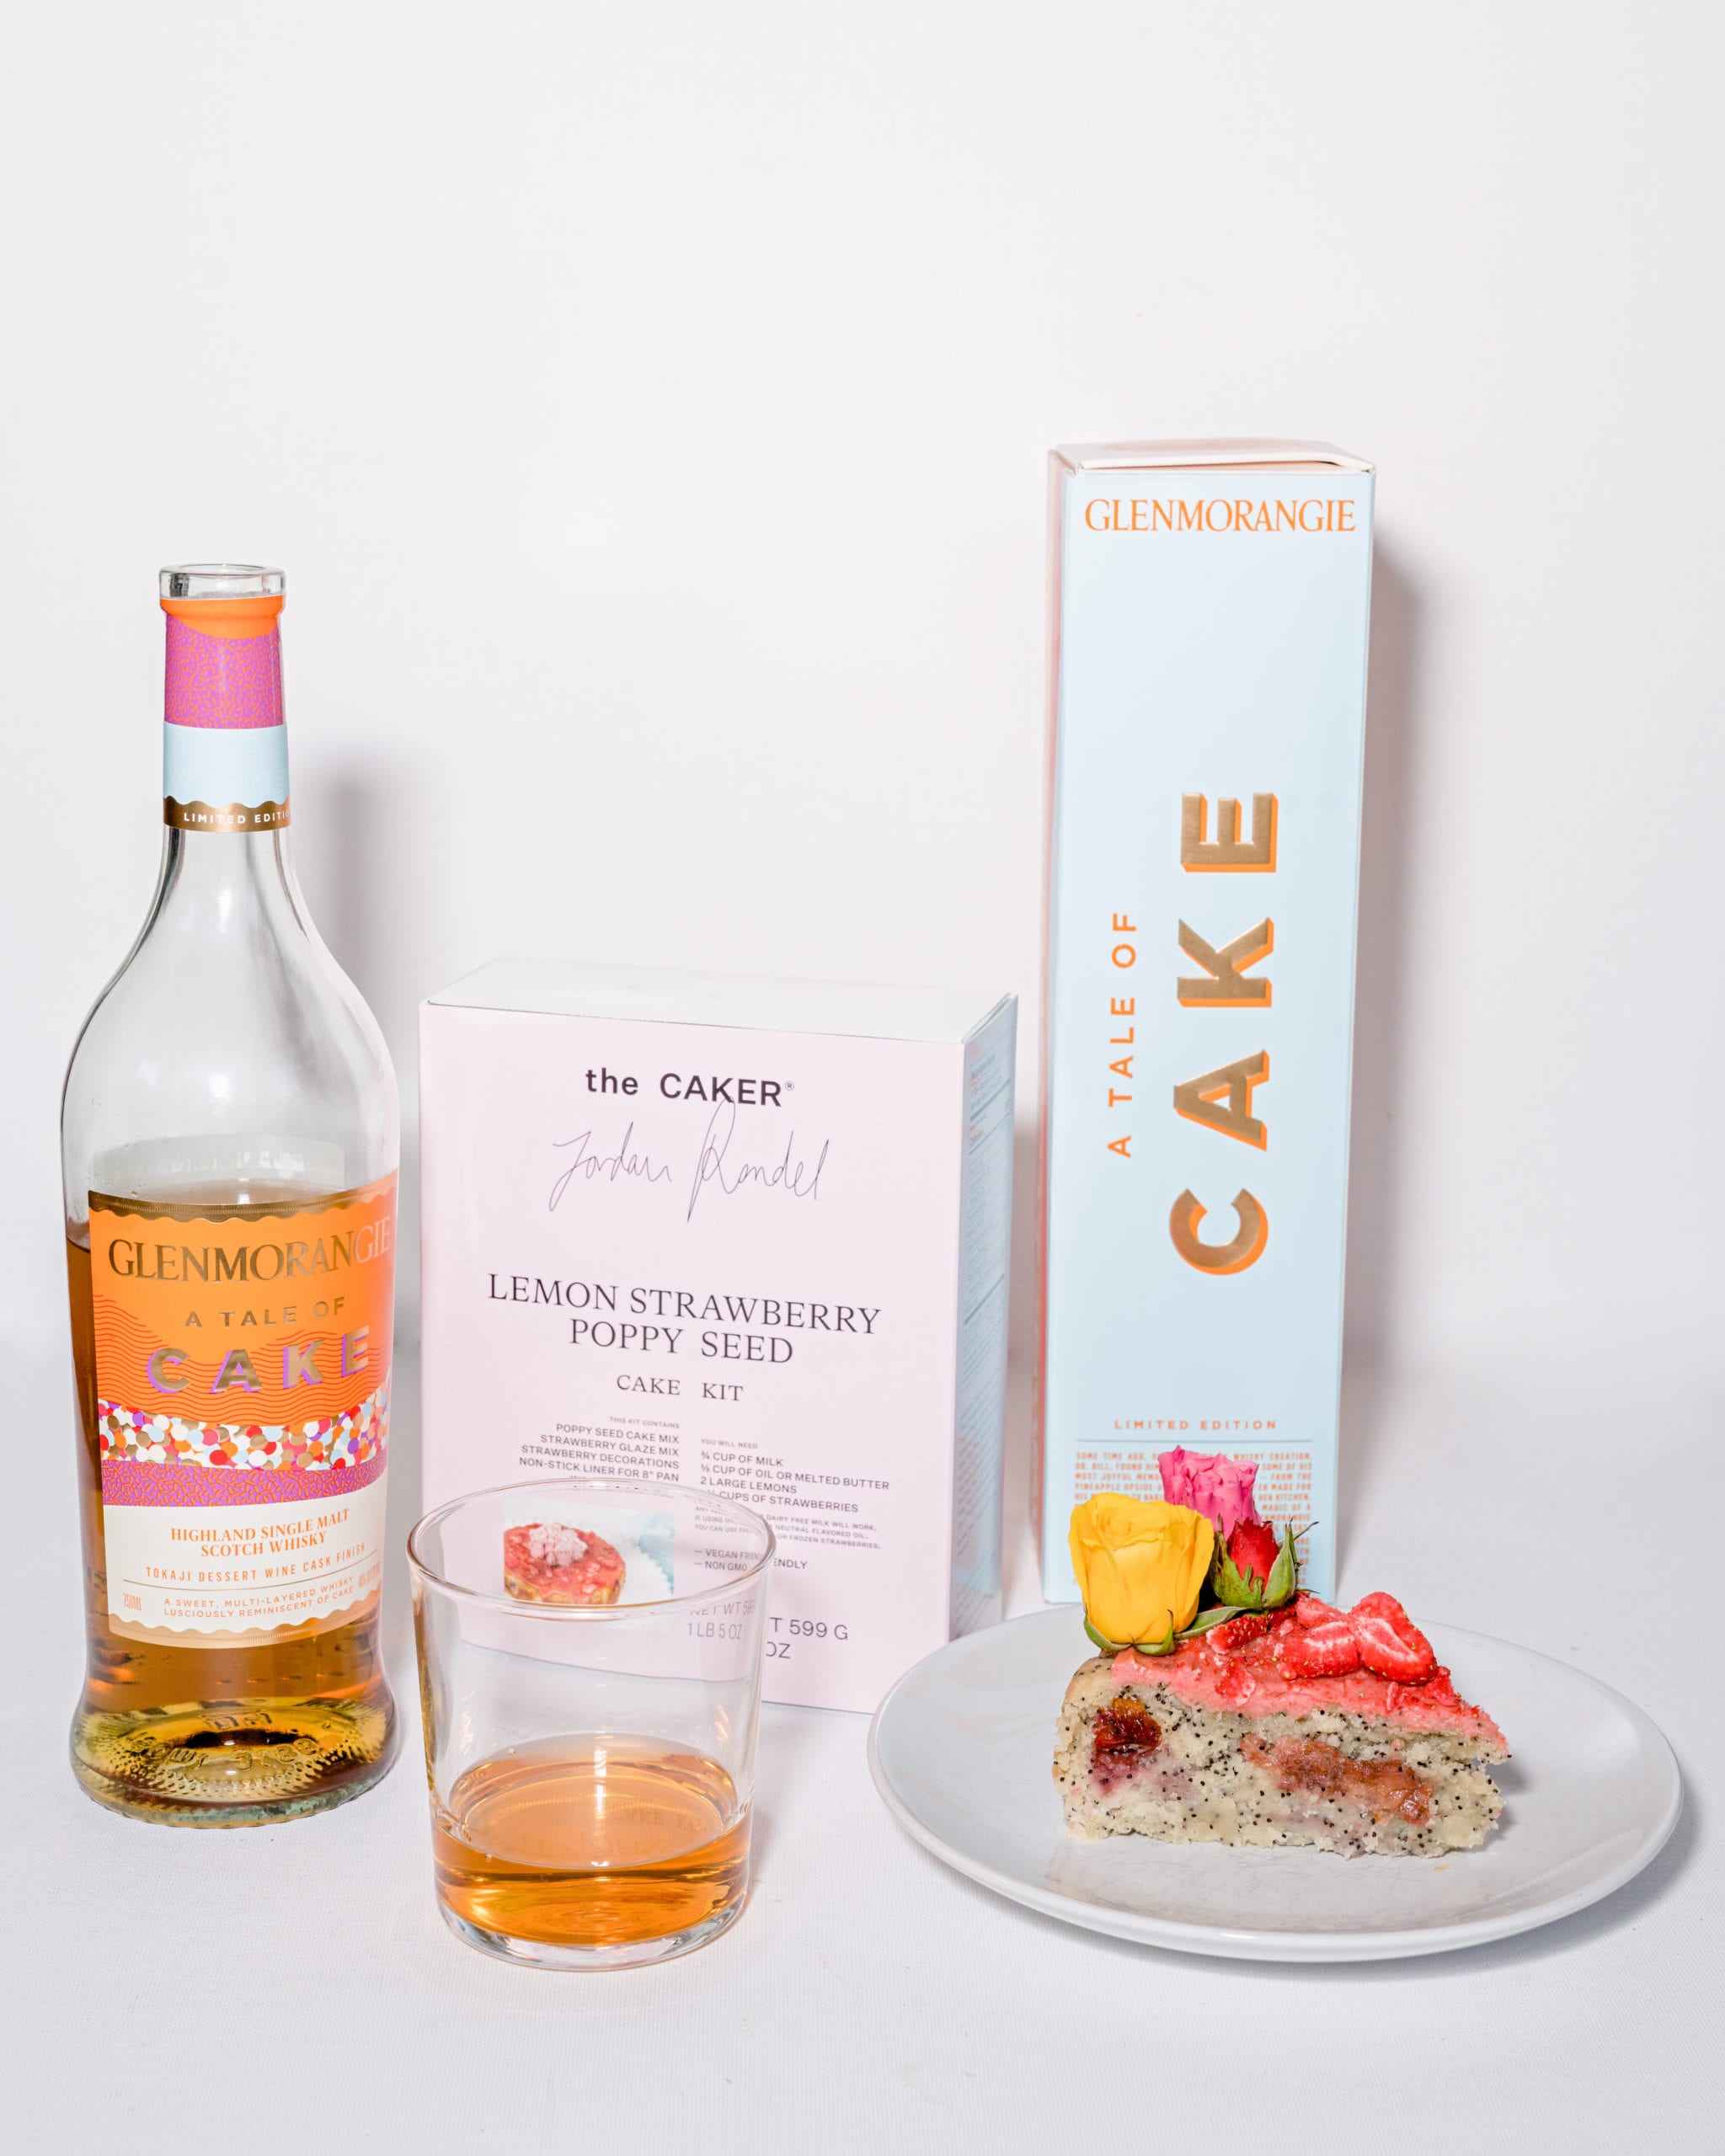 Whisky and dessert? Glenmorangie drops limited edition cake kit with The Caker